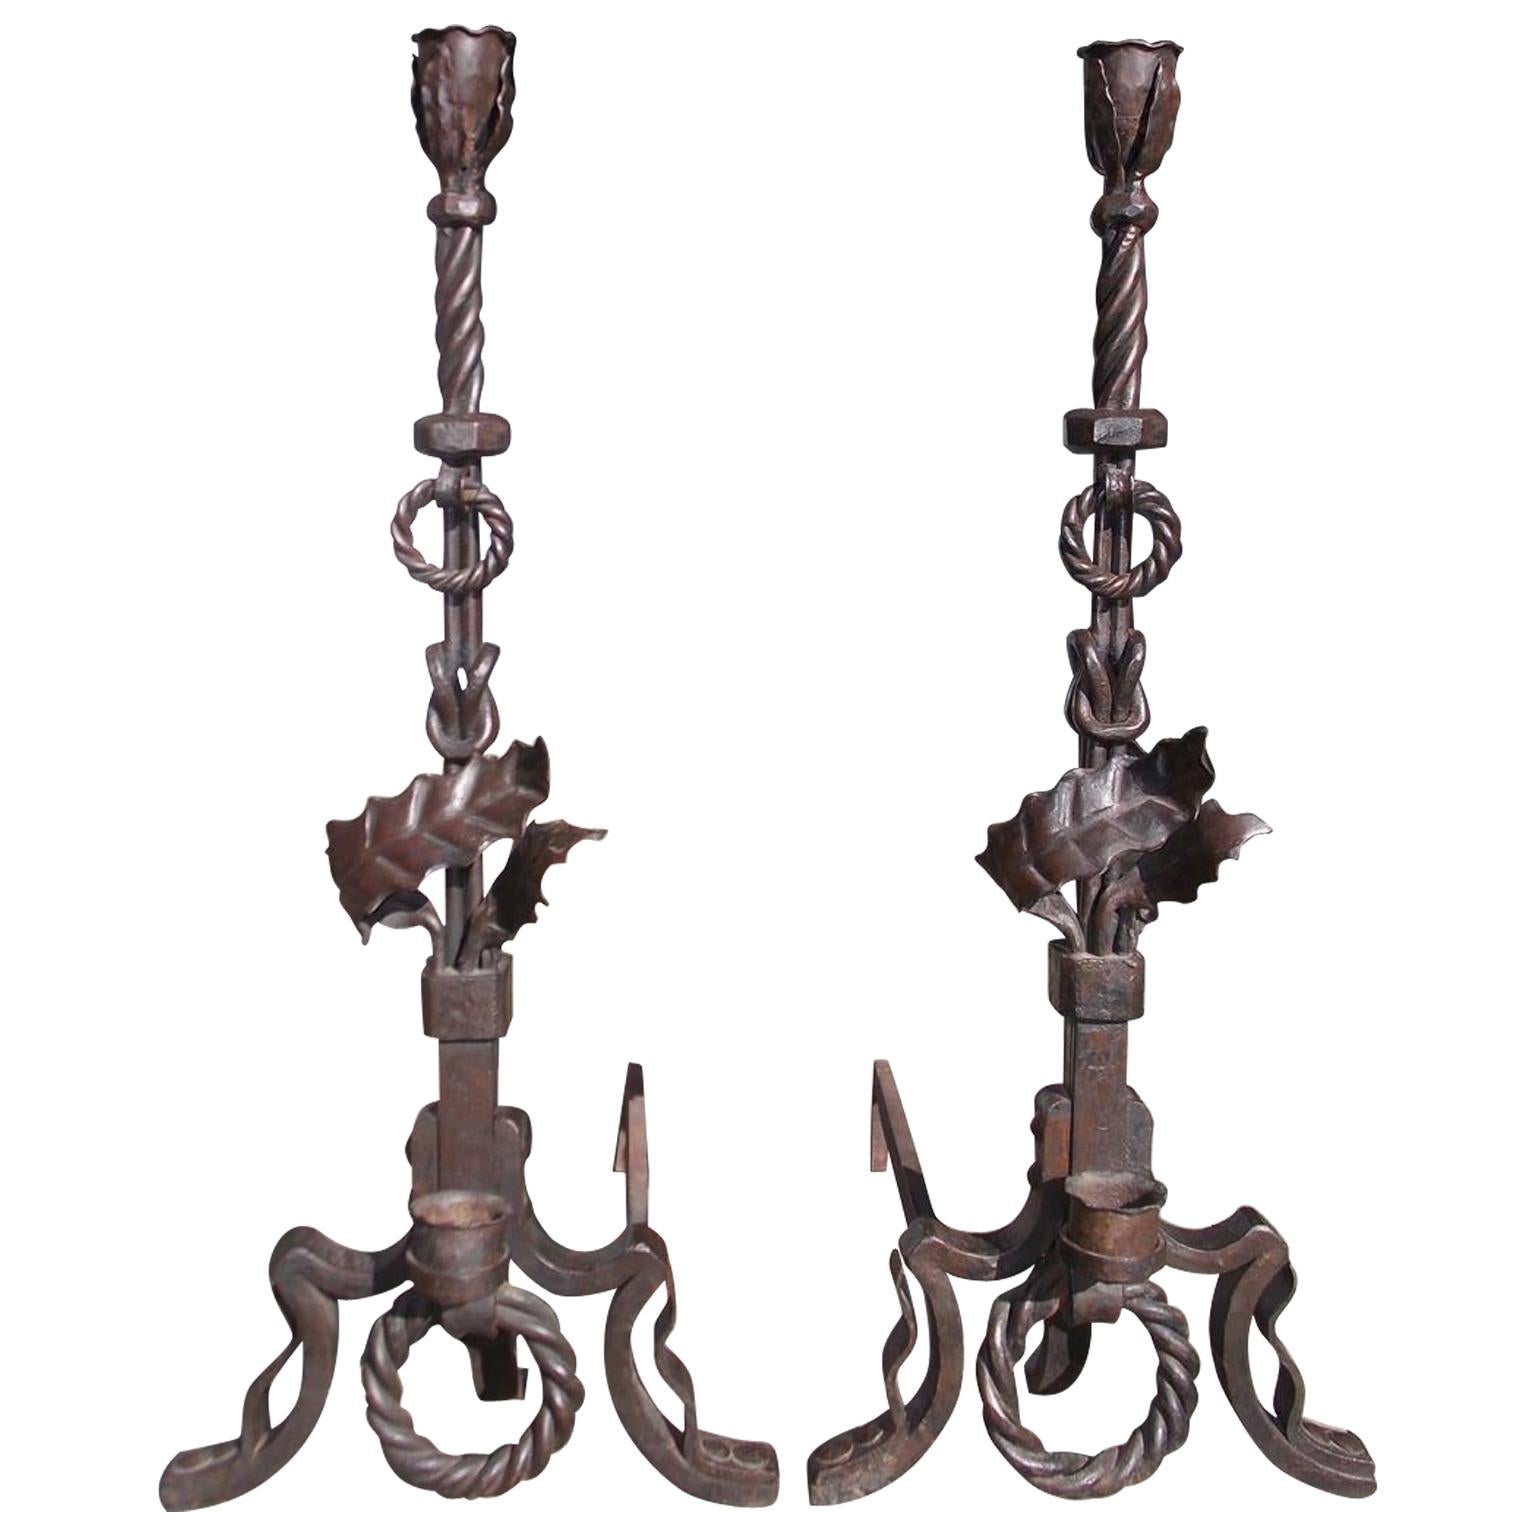 Pair of American Wrought Iron and Faux Painted Bronze Foliage Andirons, C. 1890 For Sale